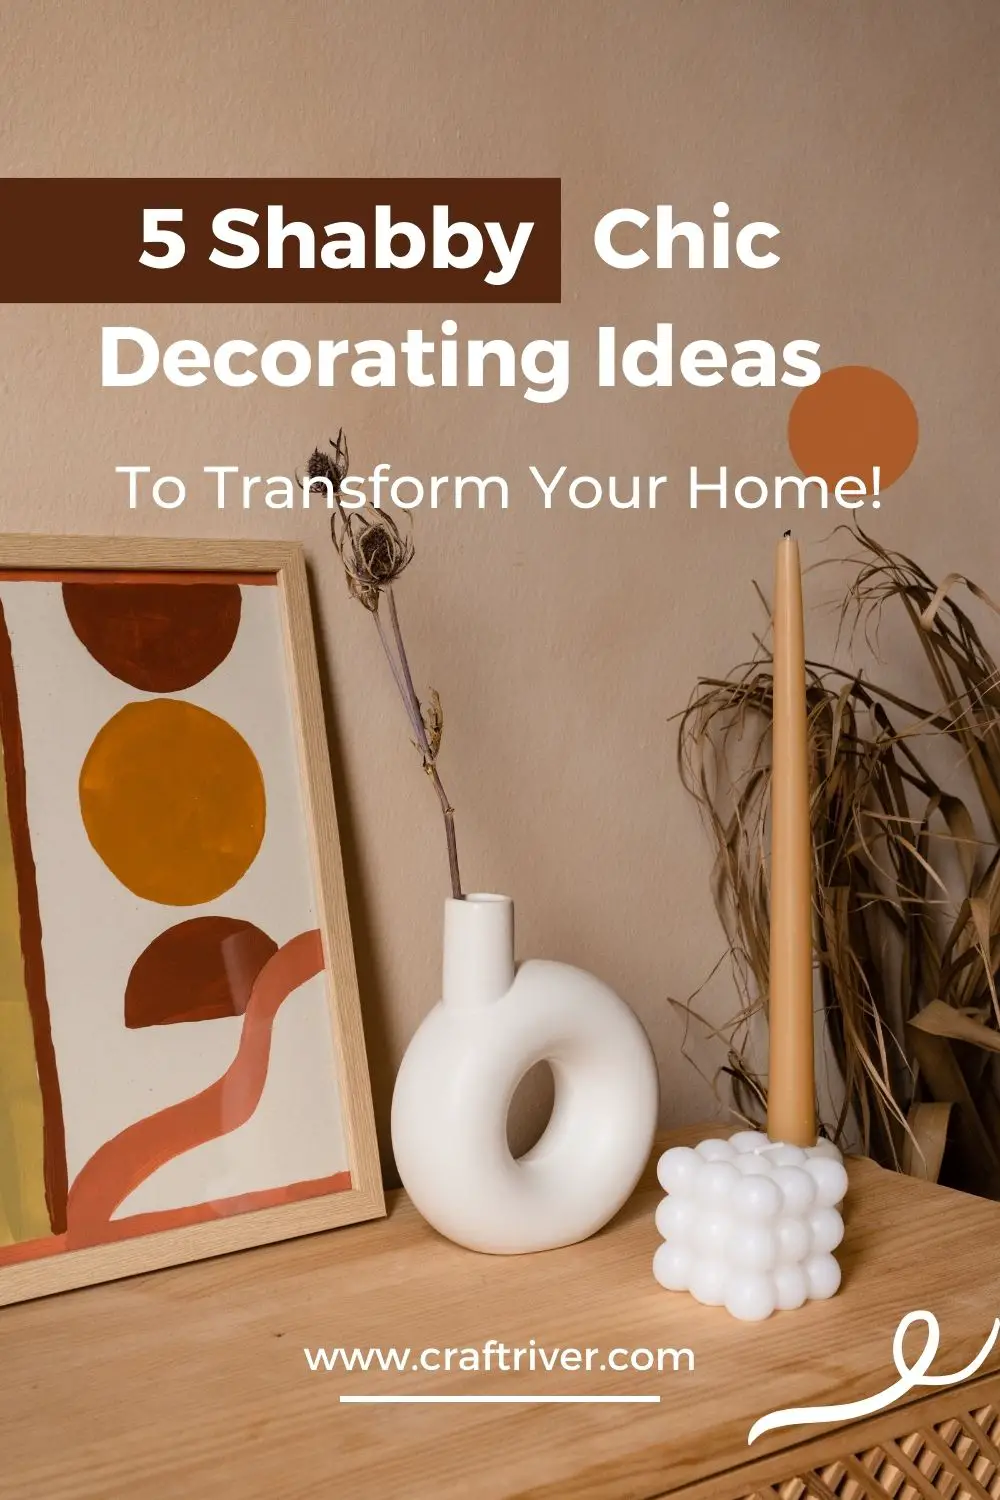 Shabby Chic Decorating Ideas to Transform Your Home